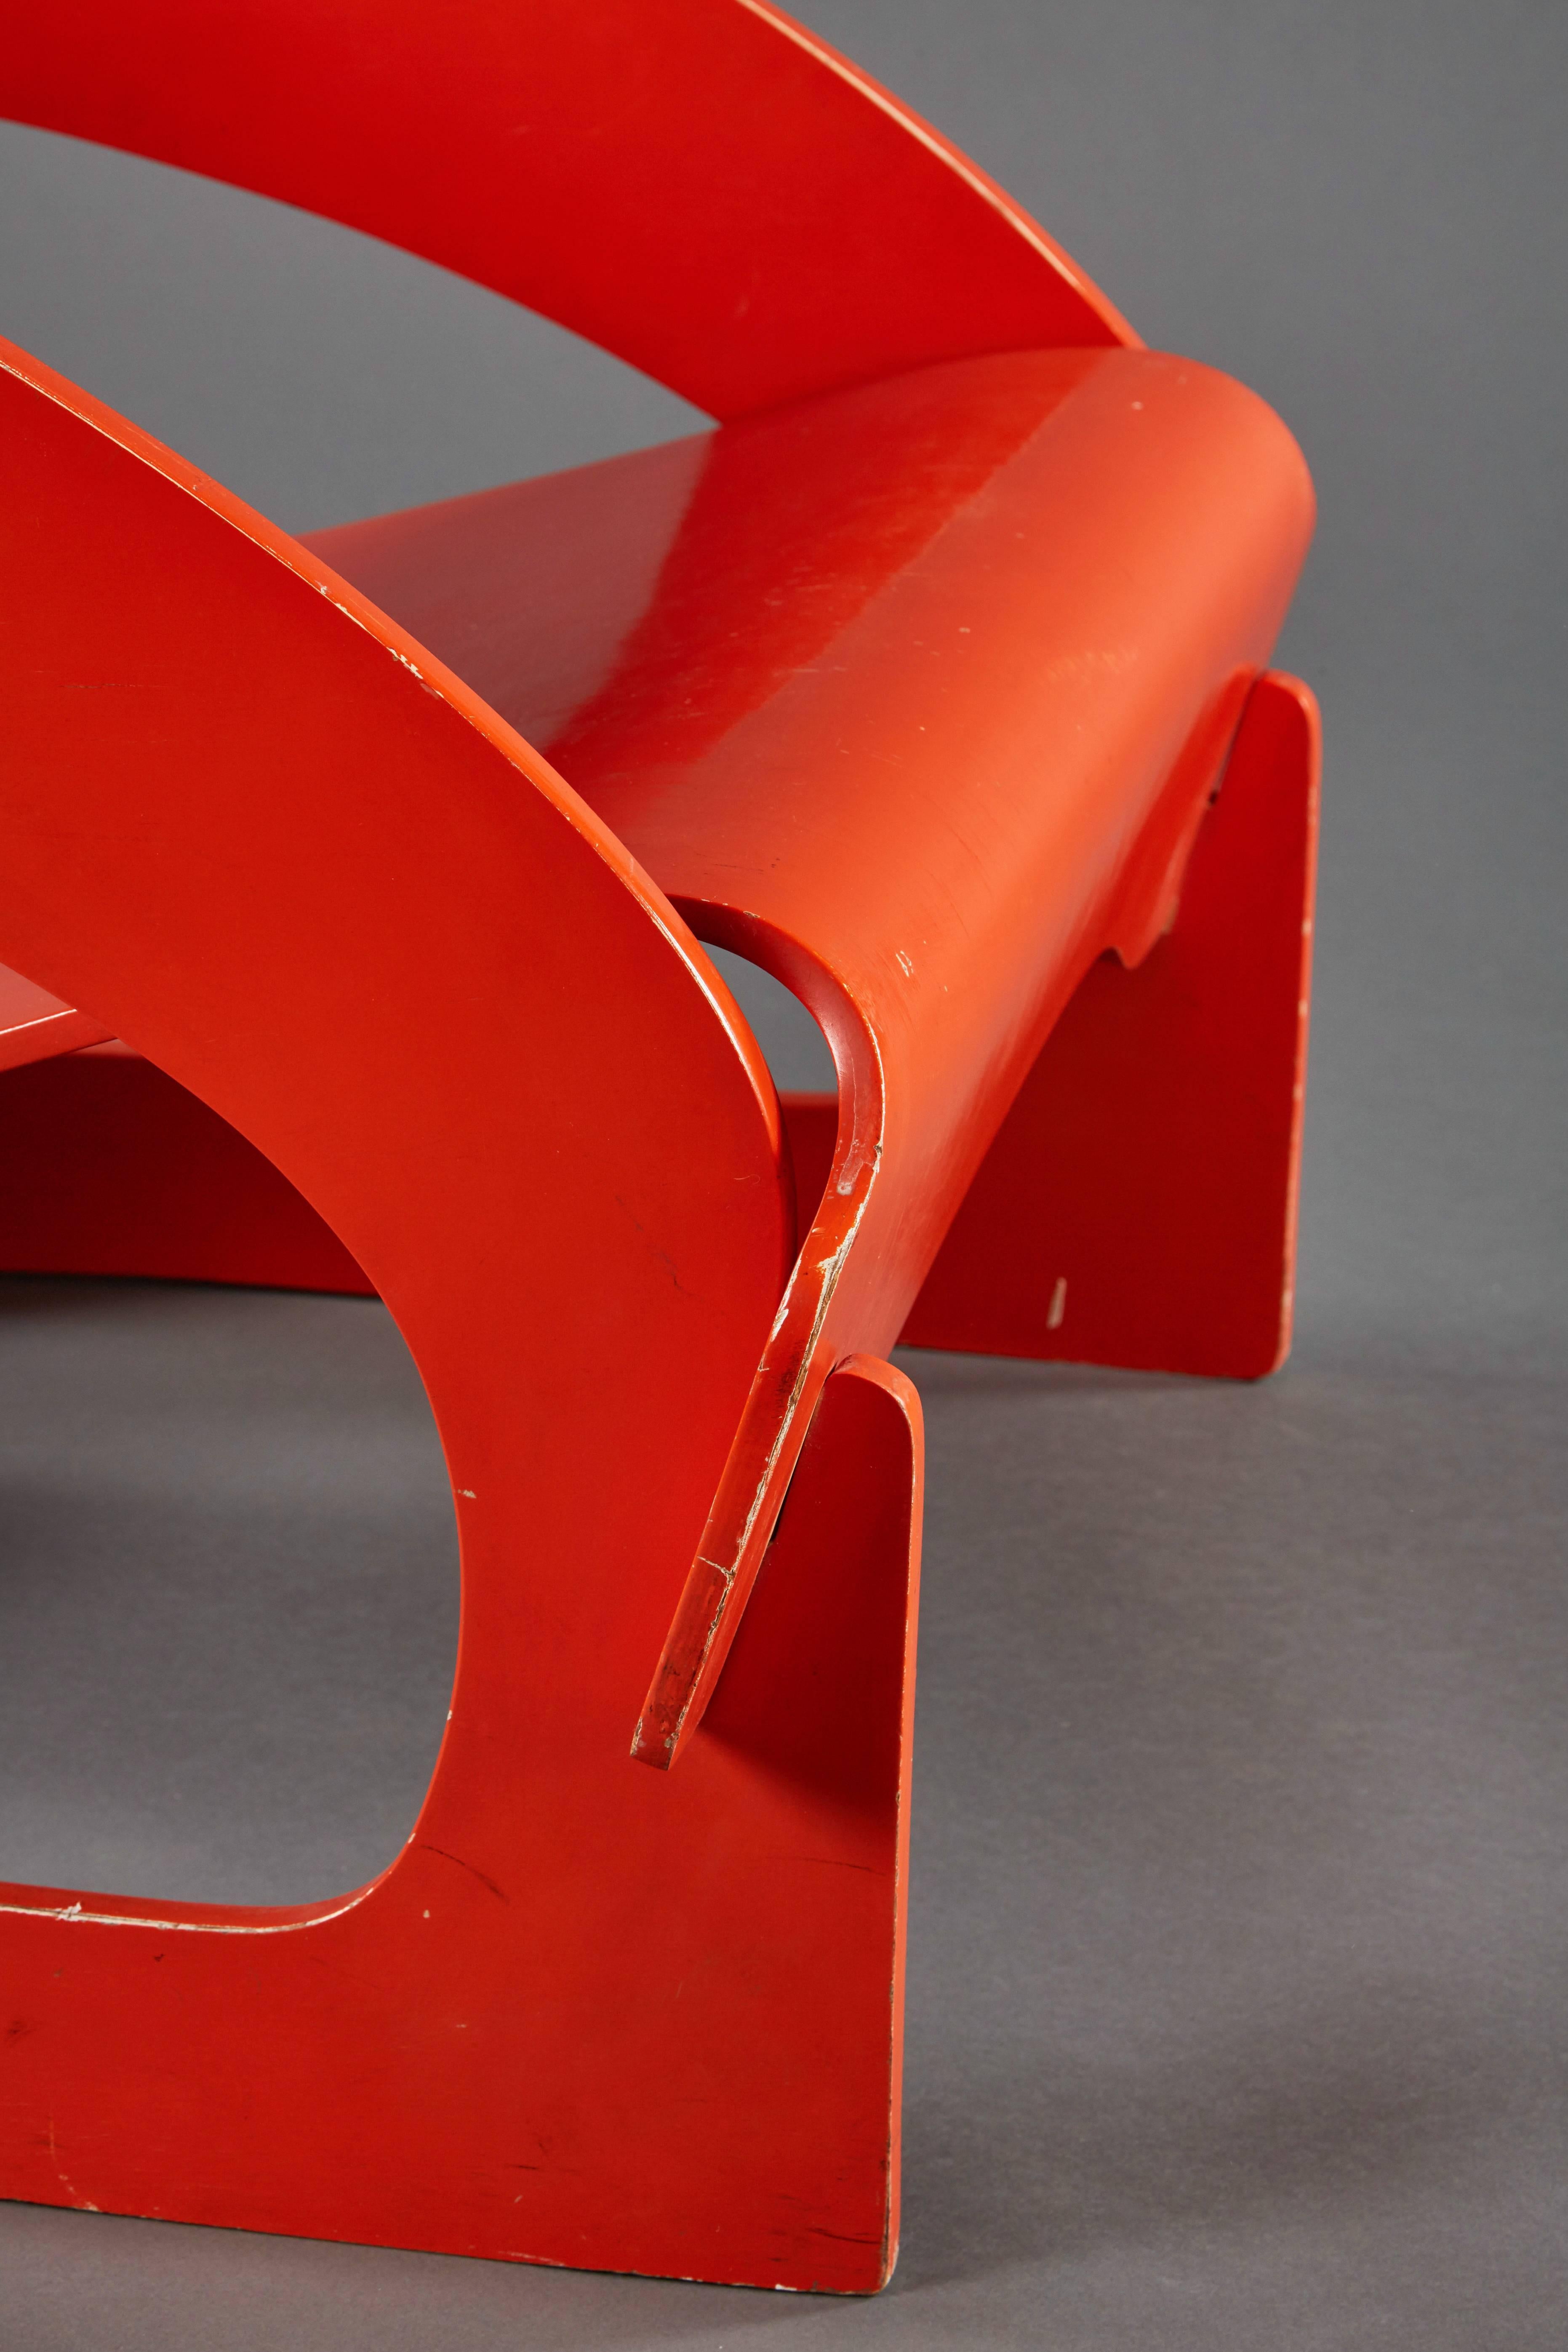 20th Century Red Lacquered Sculptural Joe Colombo No. 4801 “Interlocking” Chair